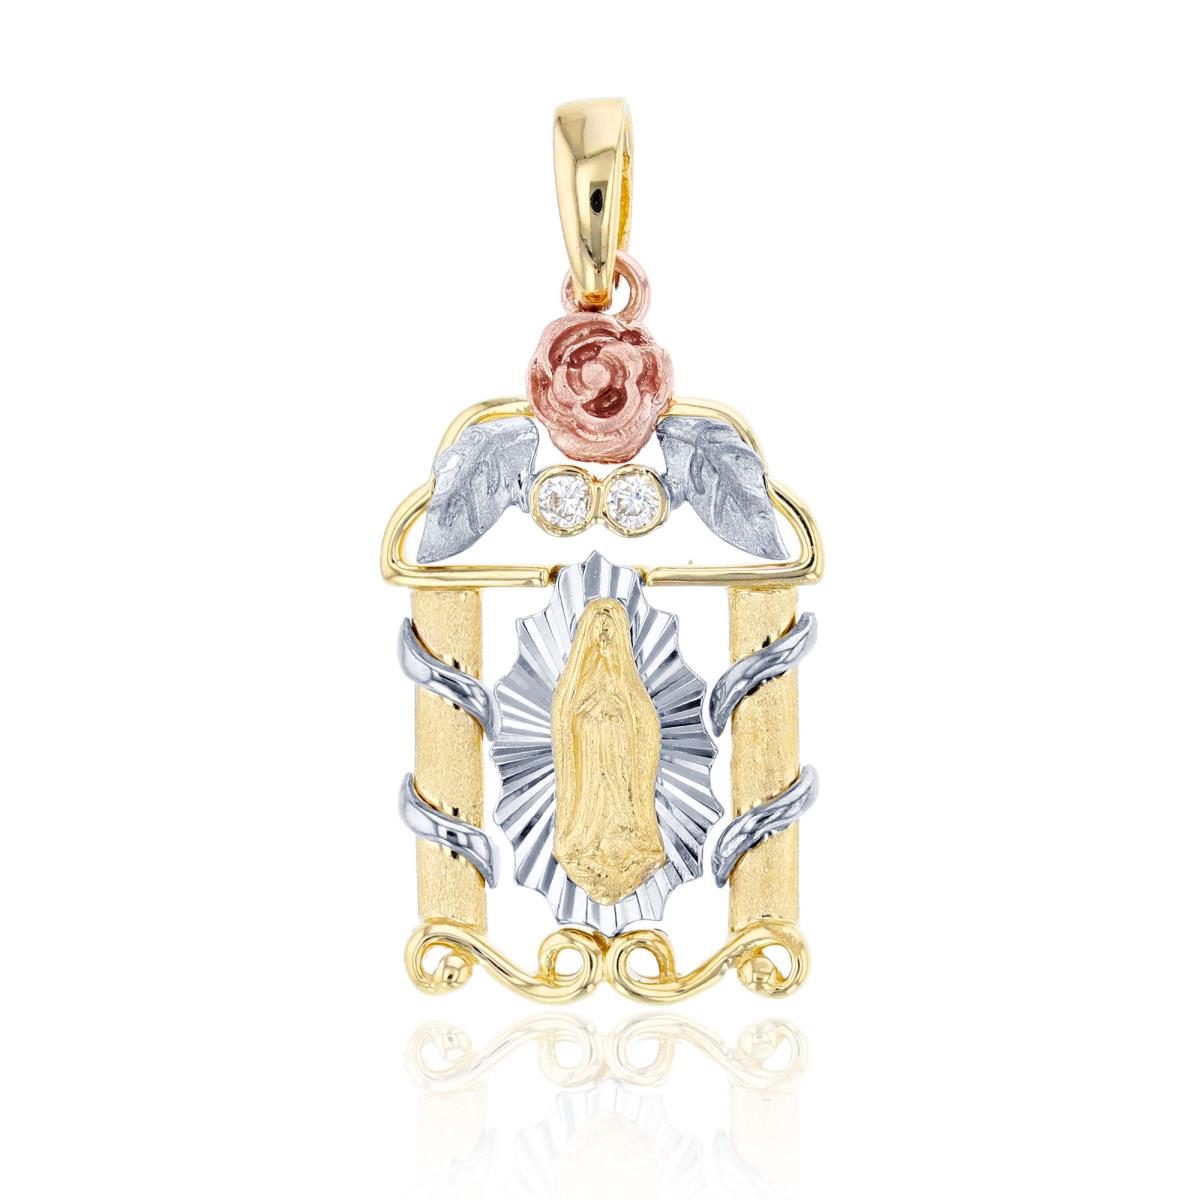 10K Tri-Color Gold Textured Virgin Mary Rose House Pendant